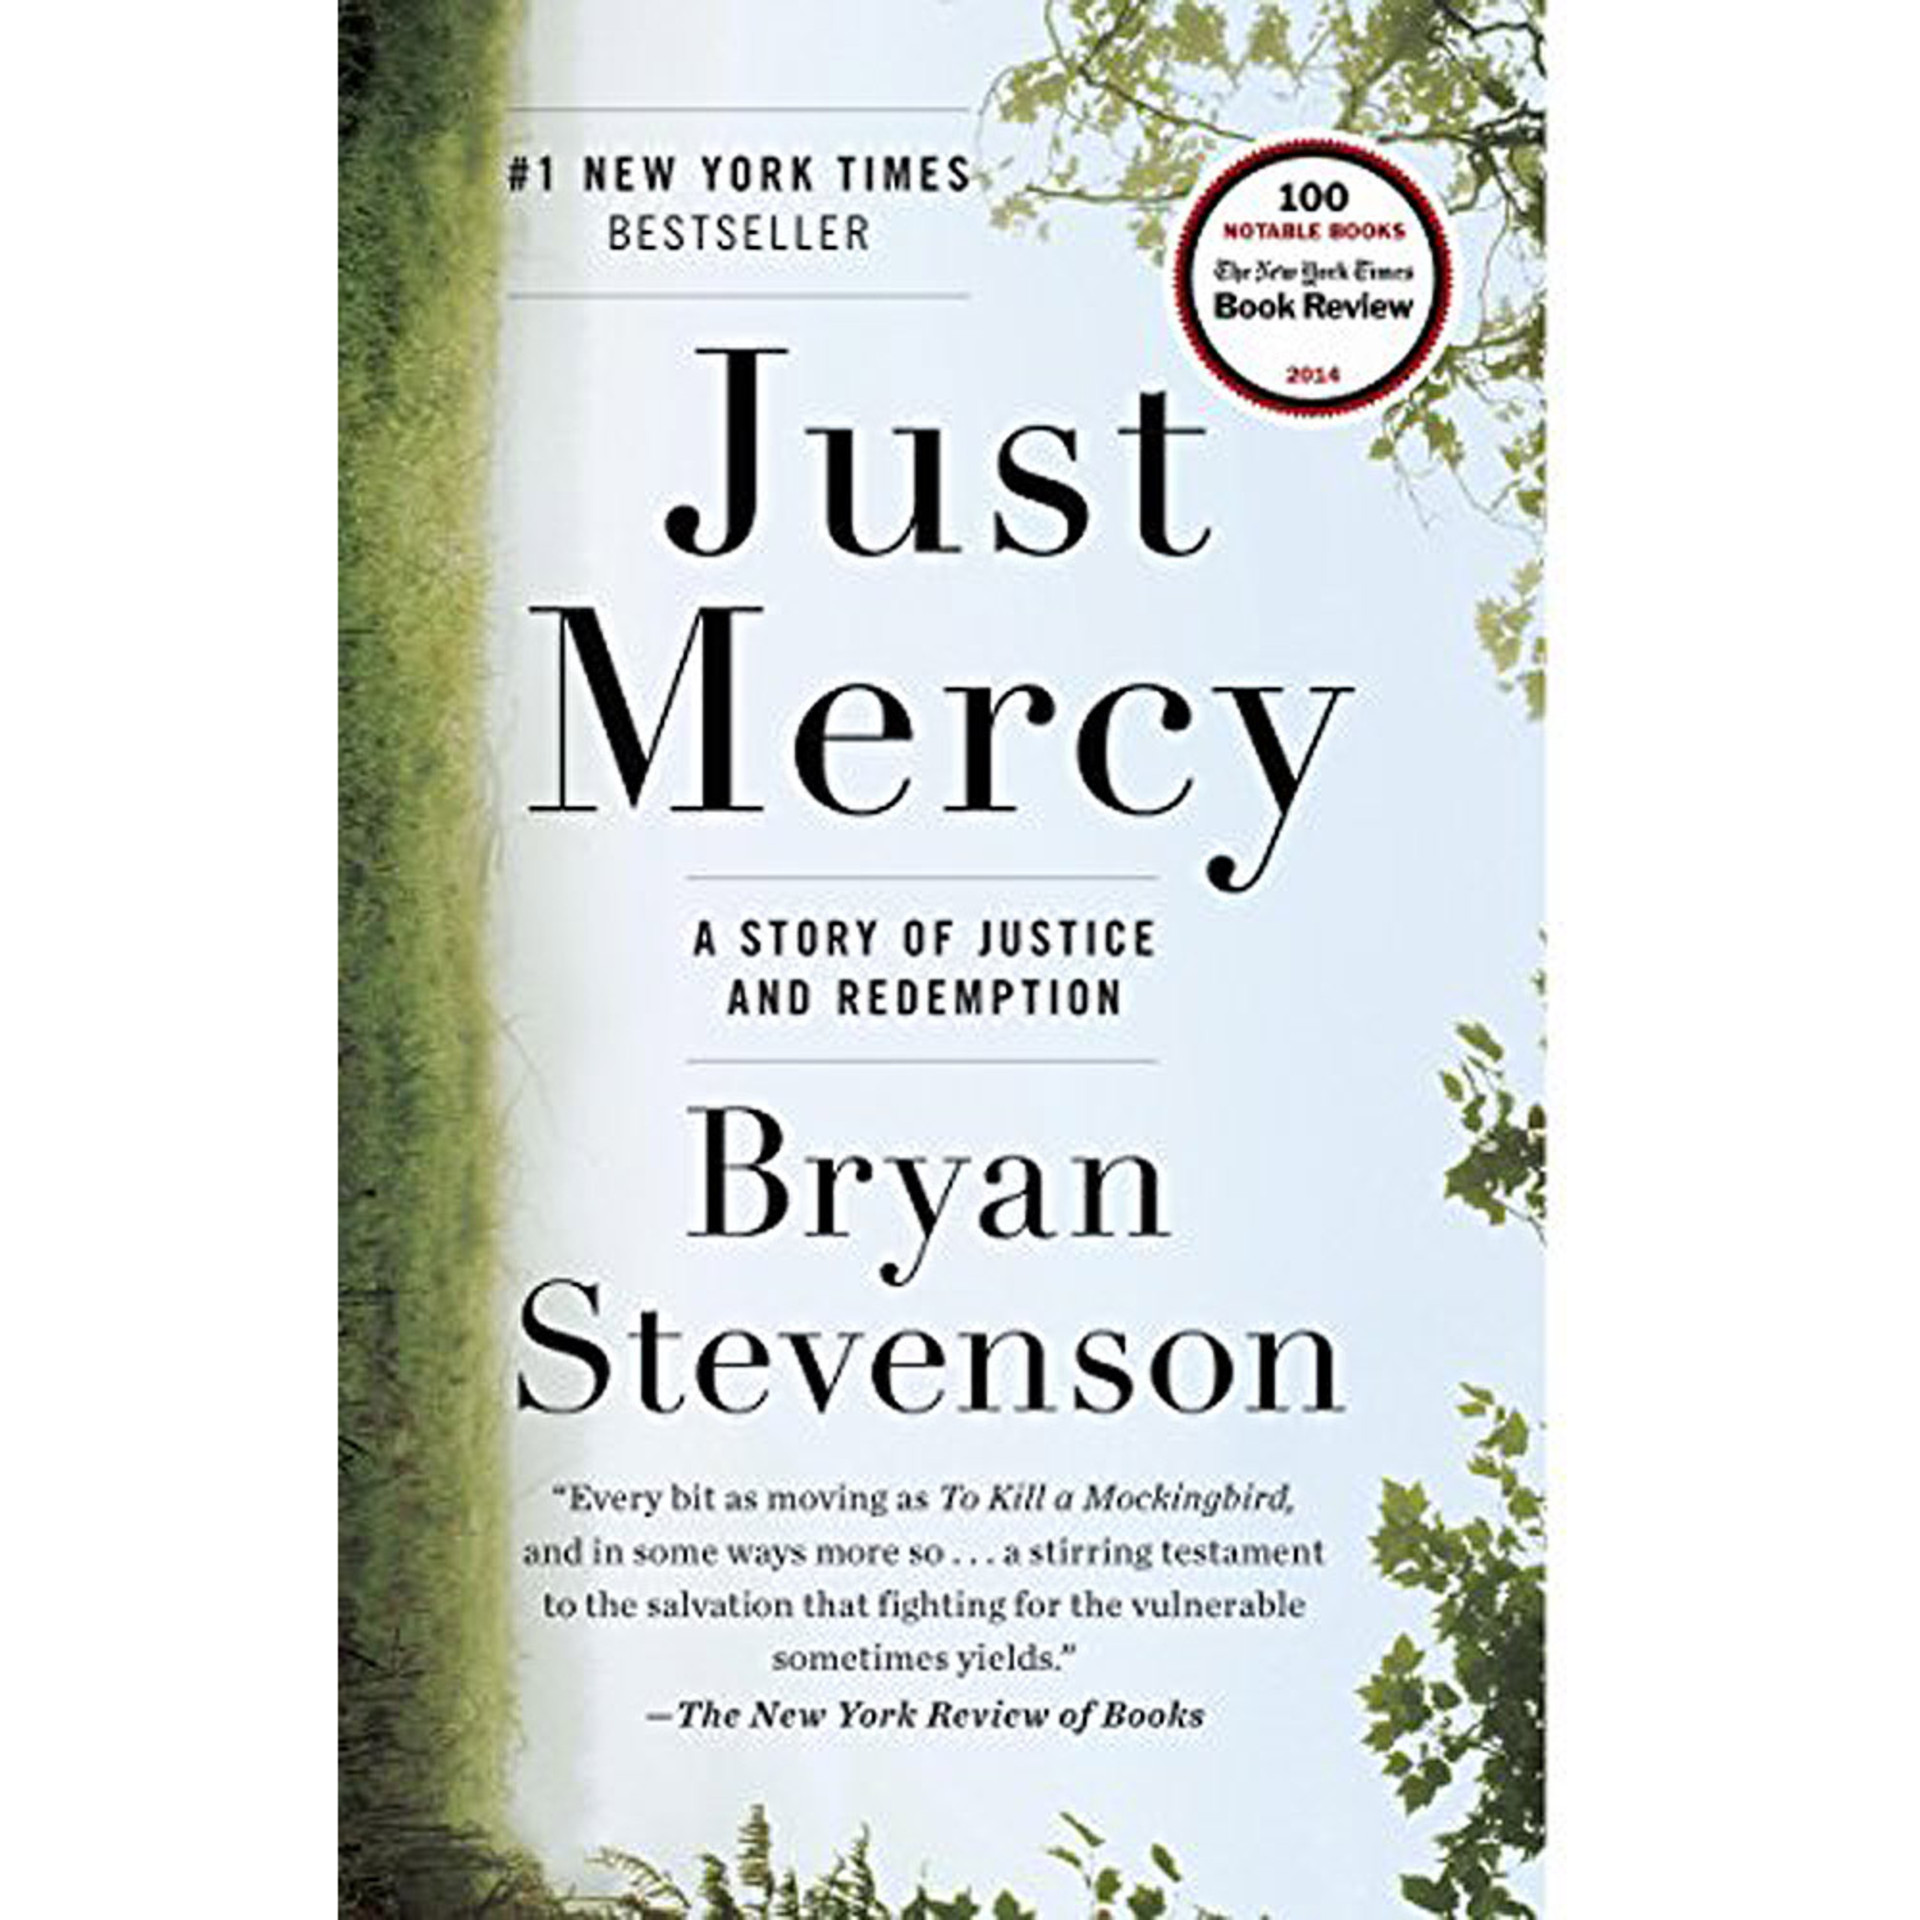 Just Mercy audiobook: A Story of Justice and Redemption